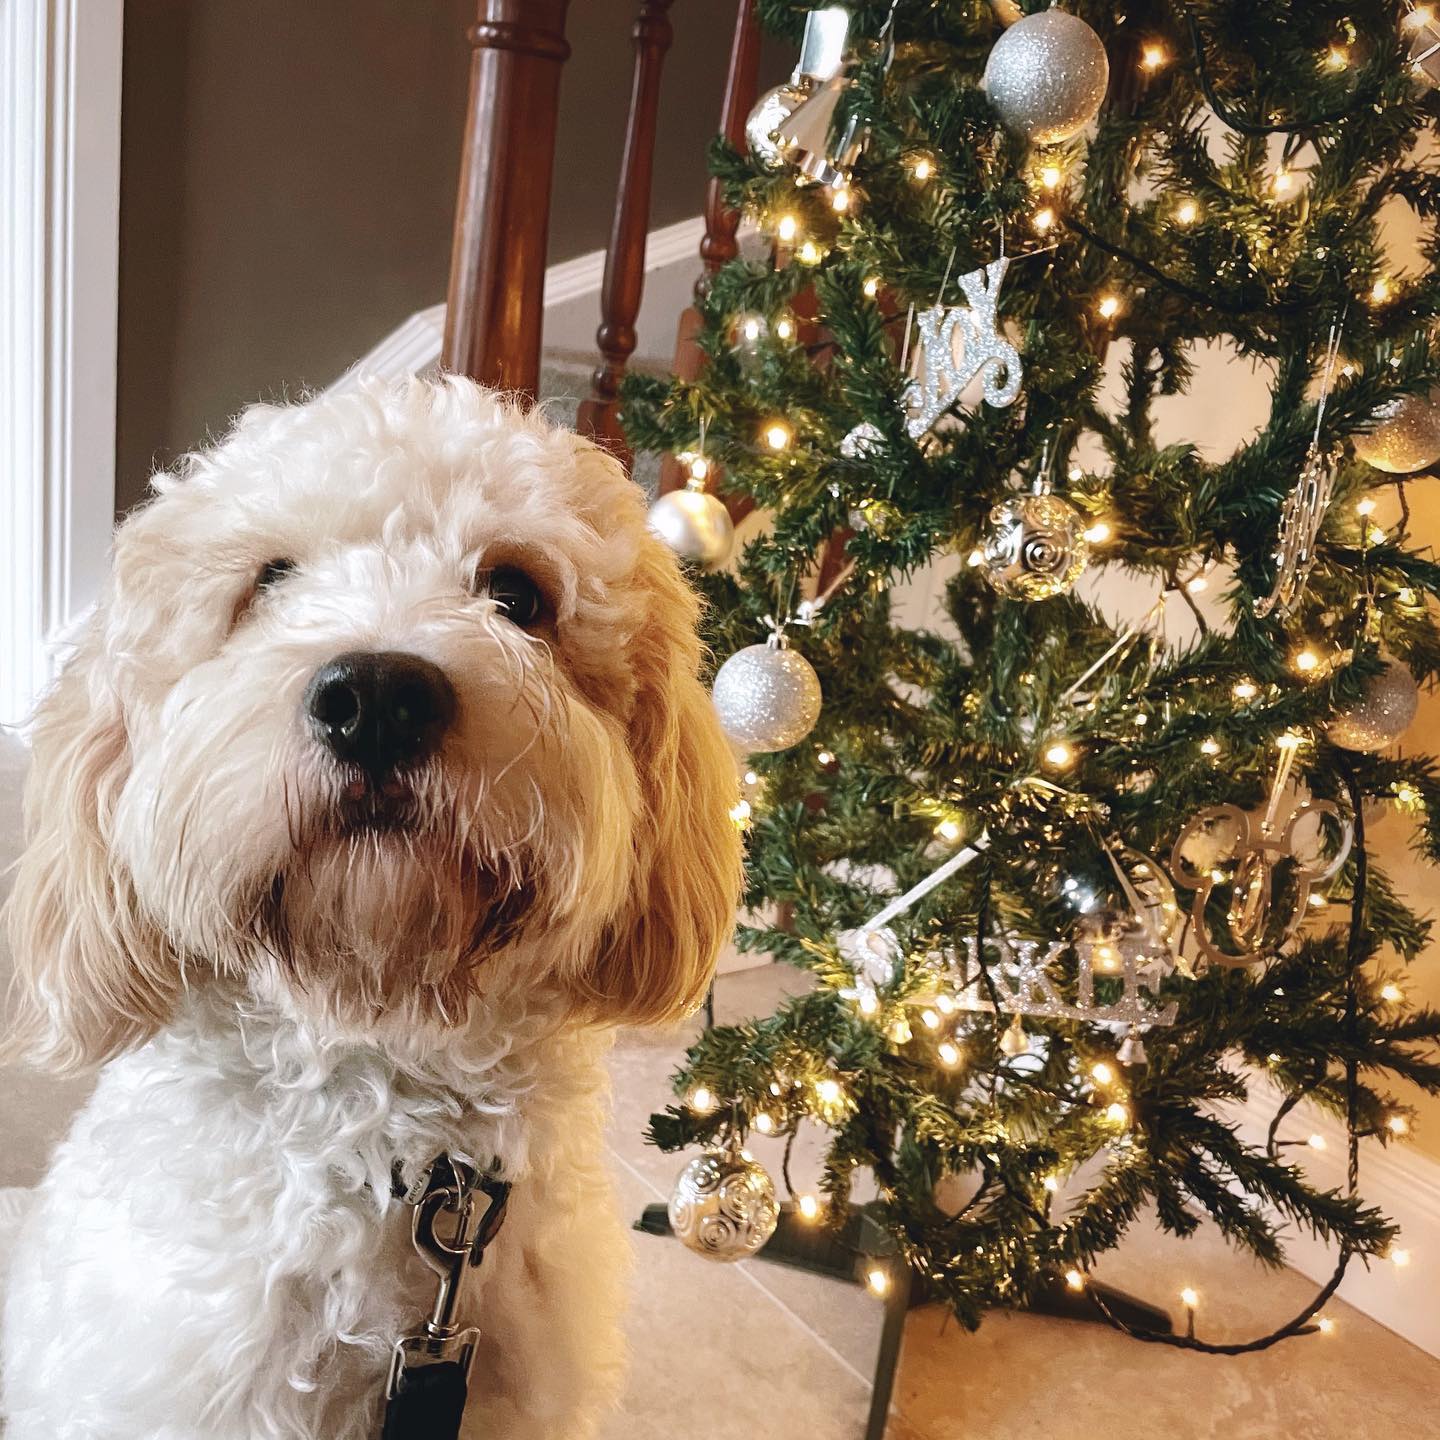 On the 13th of December.... Alfie and the Christmas tree

If you had told me a year ago I would have a puppy to sit (momentarily!) beside our Christmas tree I definitely wouldn't have believed you!